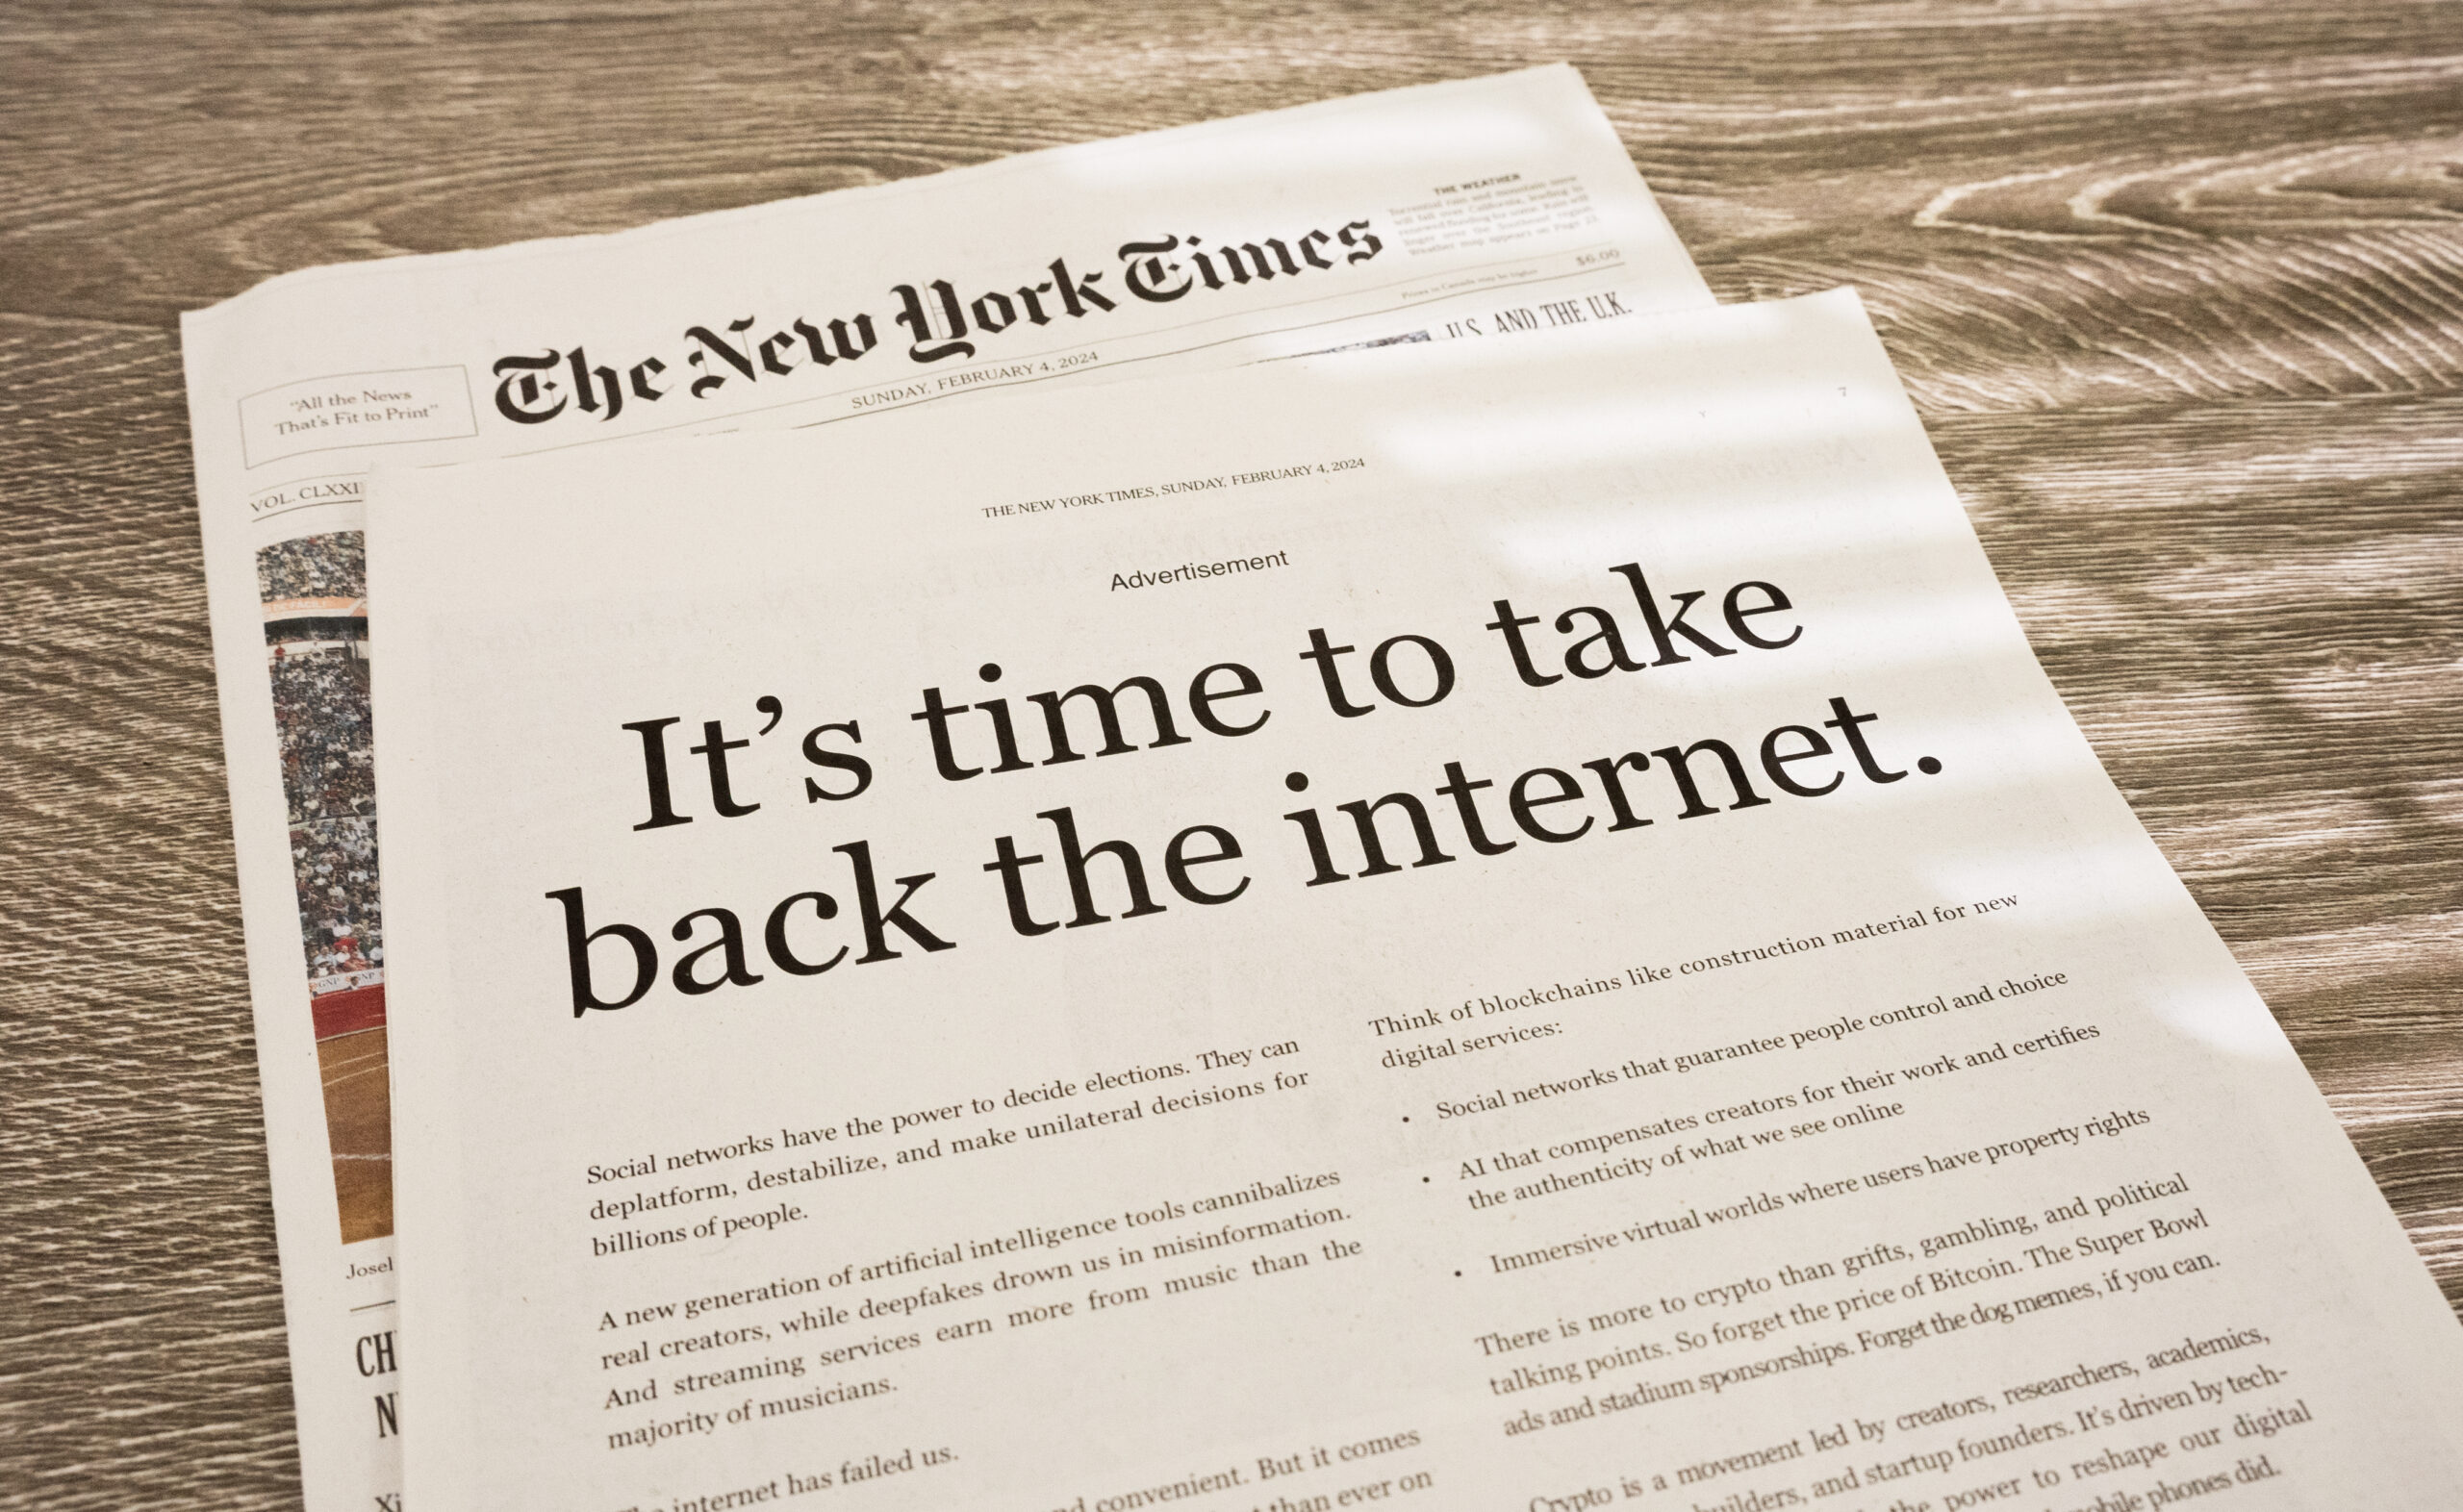 New York Times crypto ad with the headline "It's time to take back the internet"